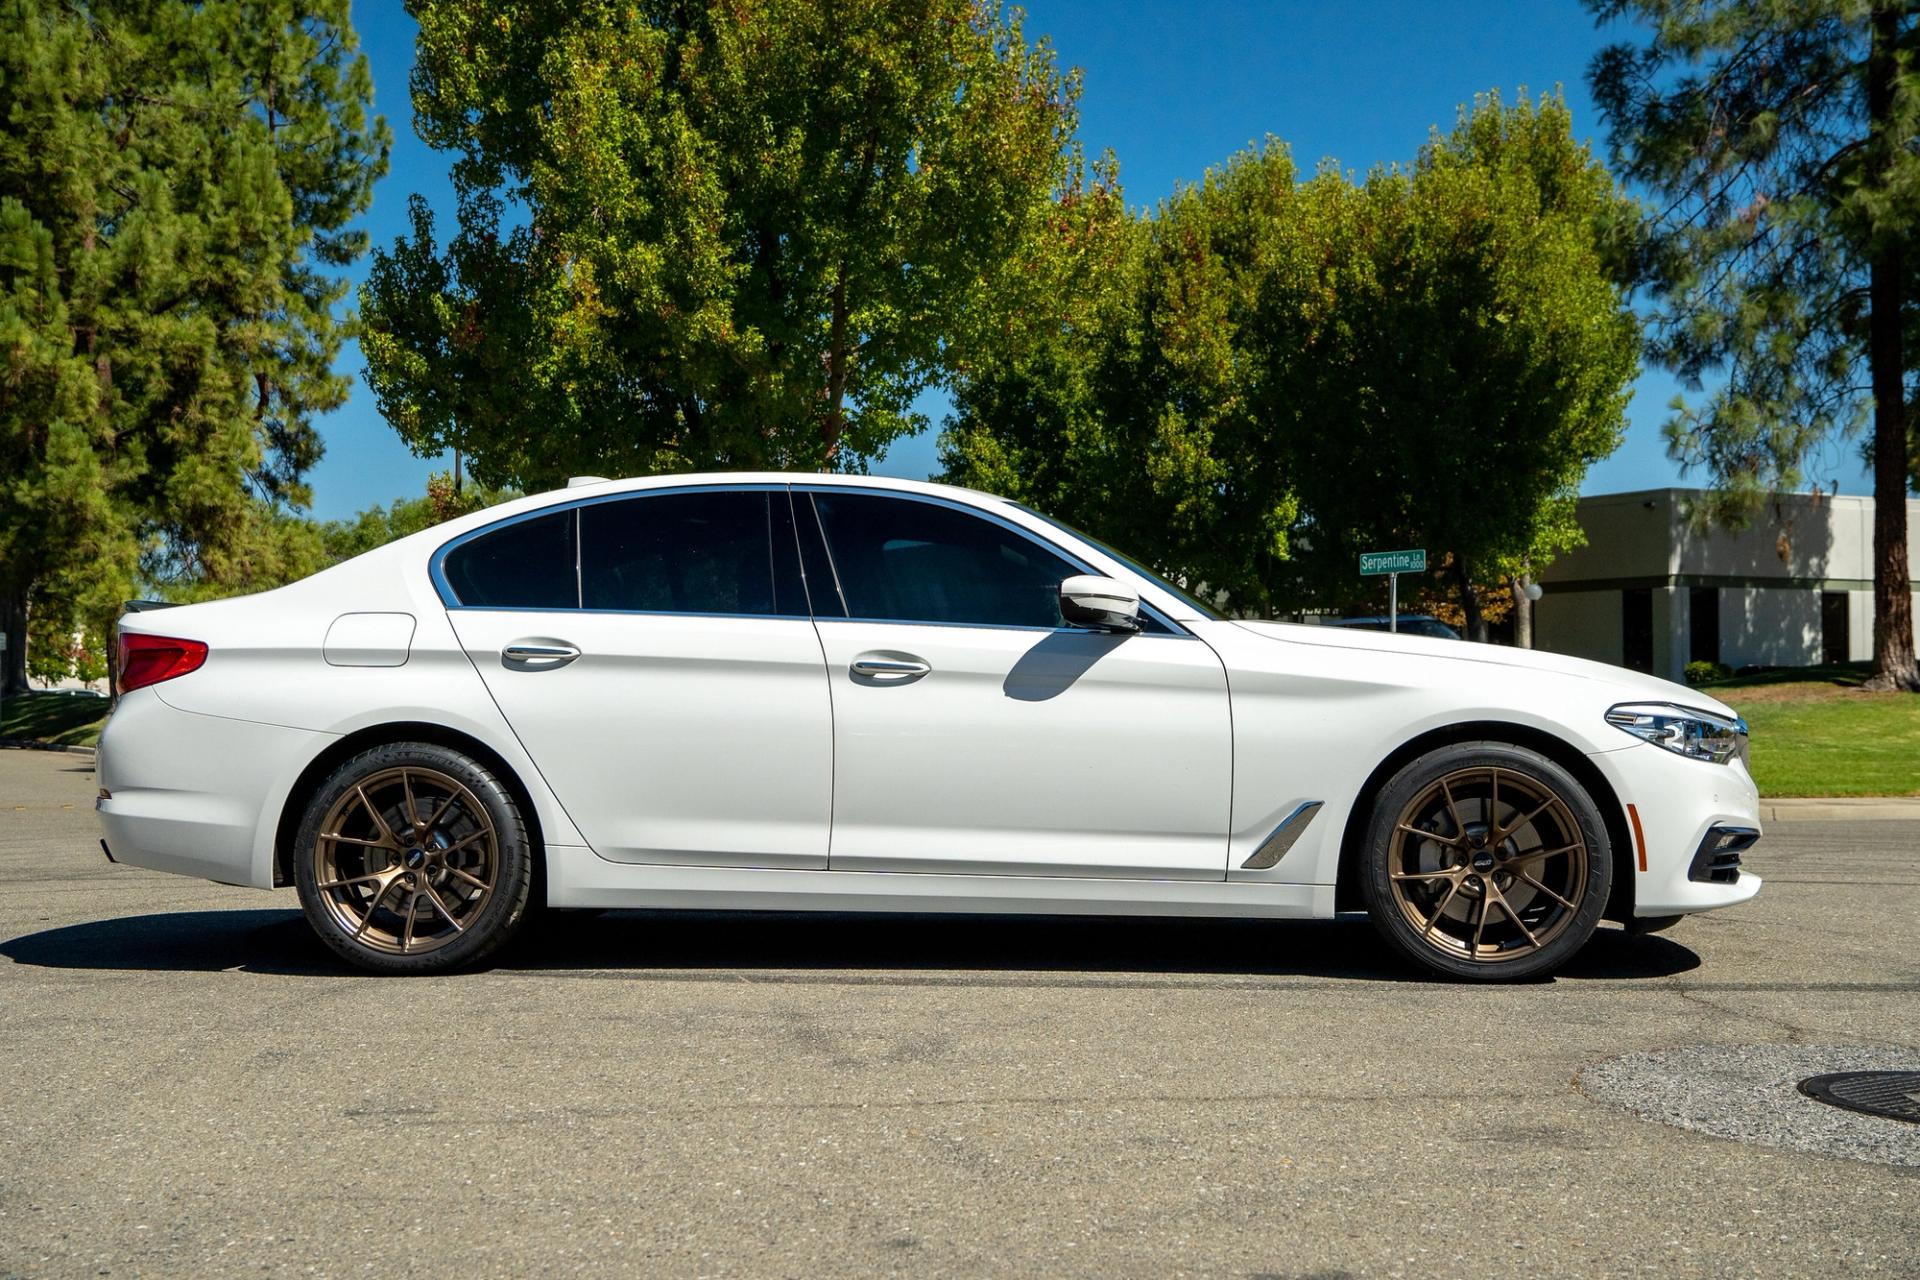 Explore the Exciting BMW G31 540i Touring